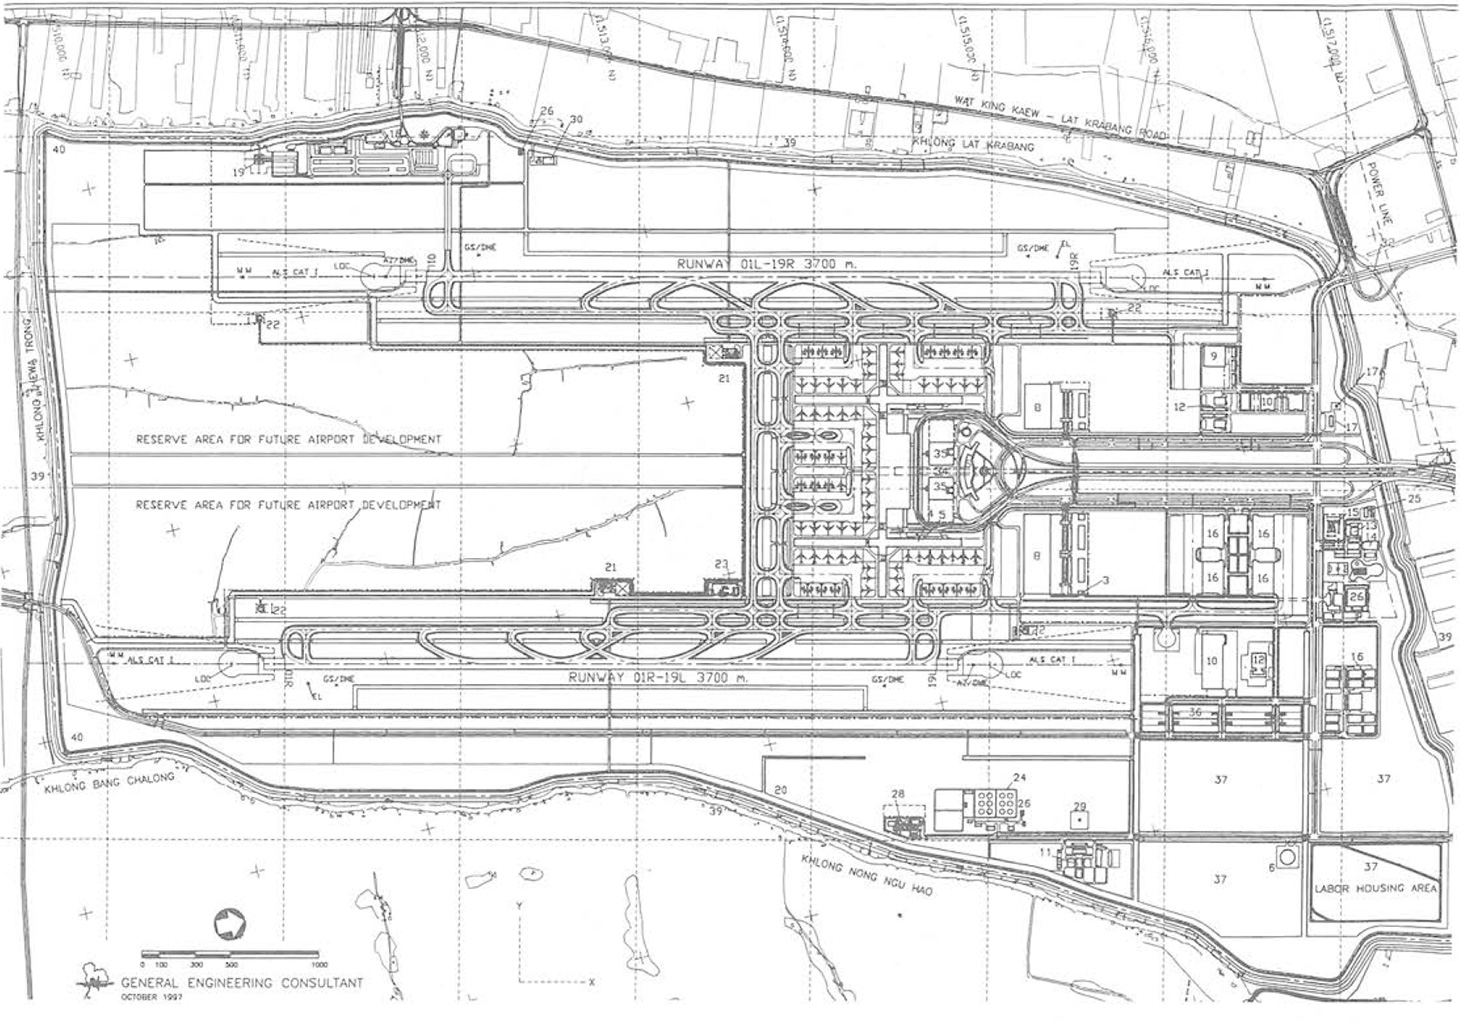 Airport Schematic (Phase 1 of Plan)